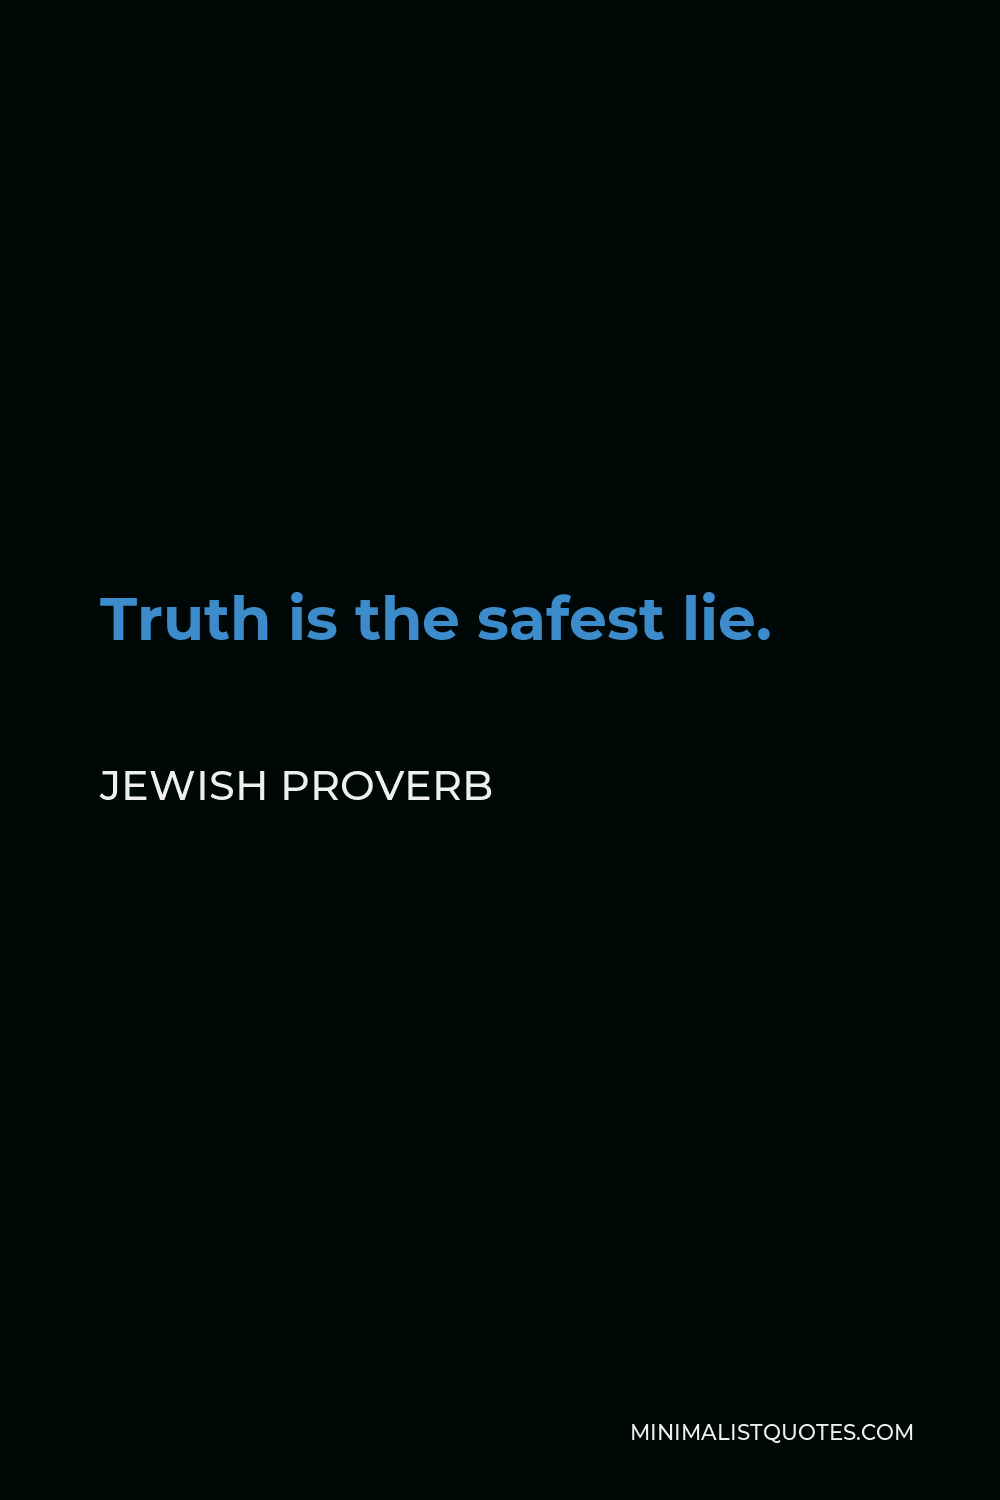 Jewish Proverb Quote - Truth is the safest lie.